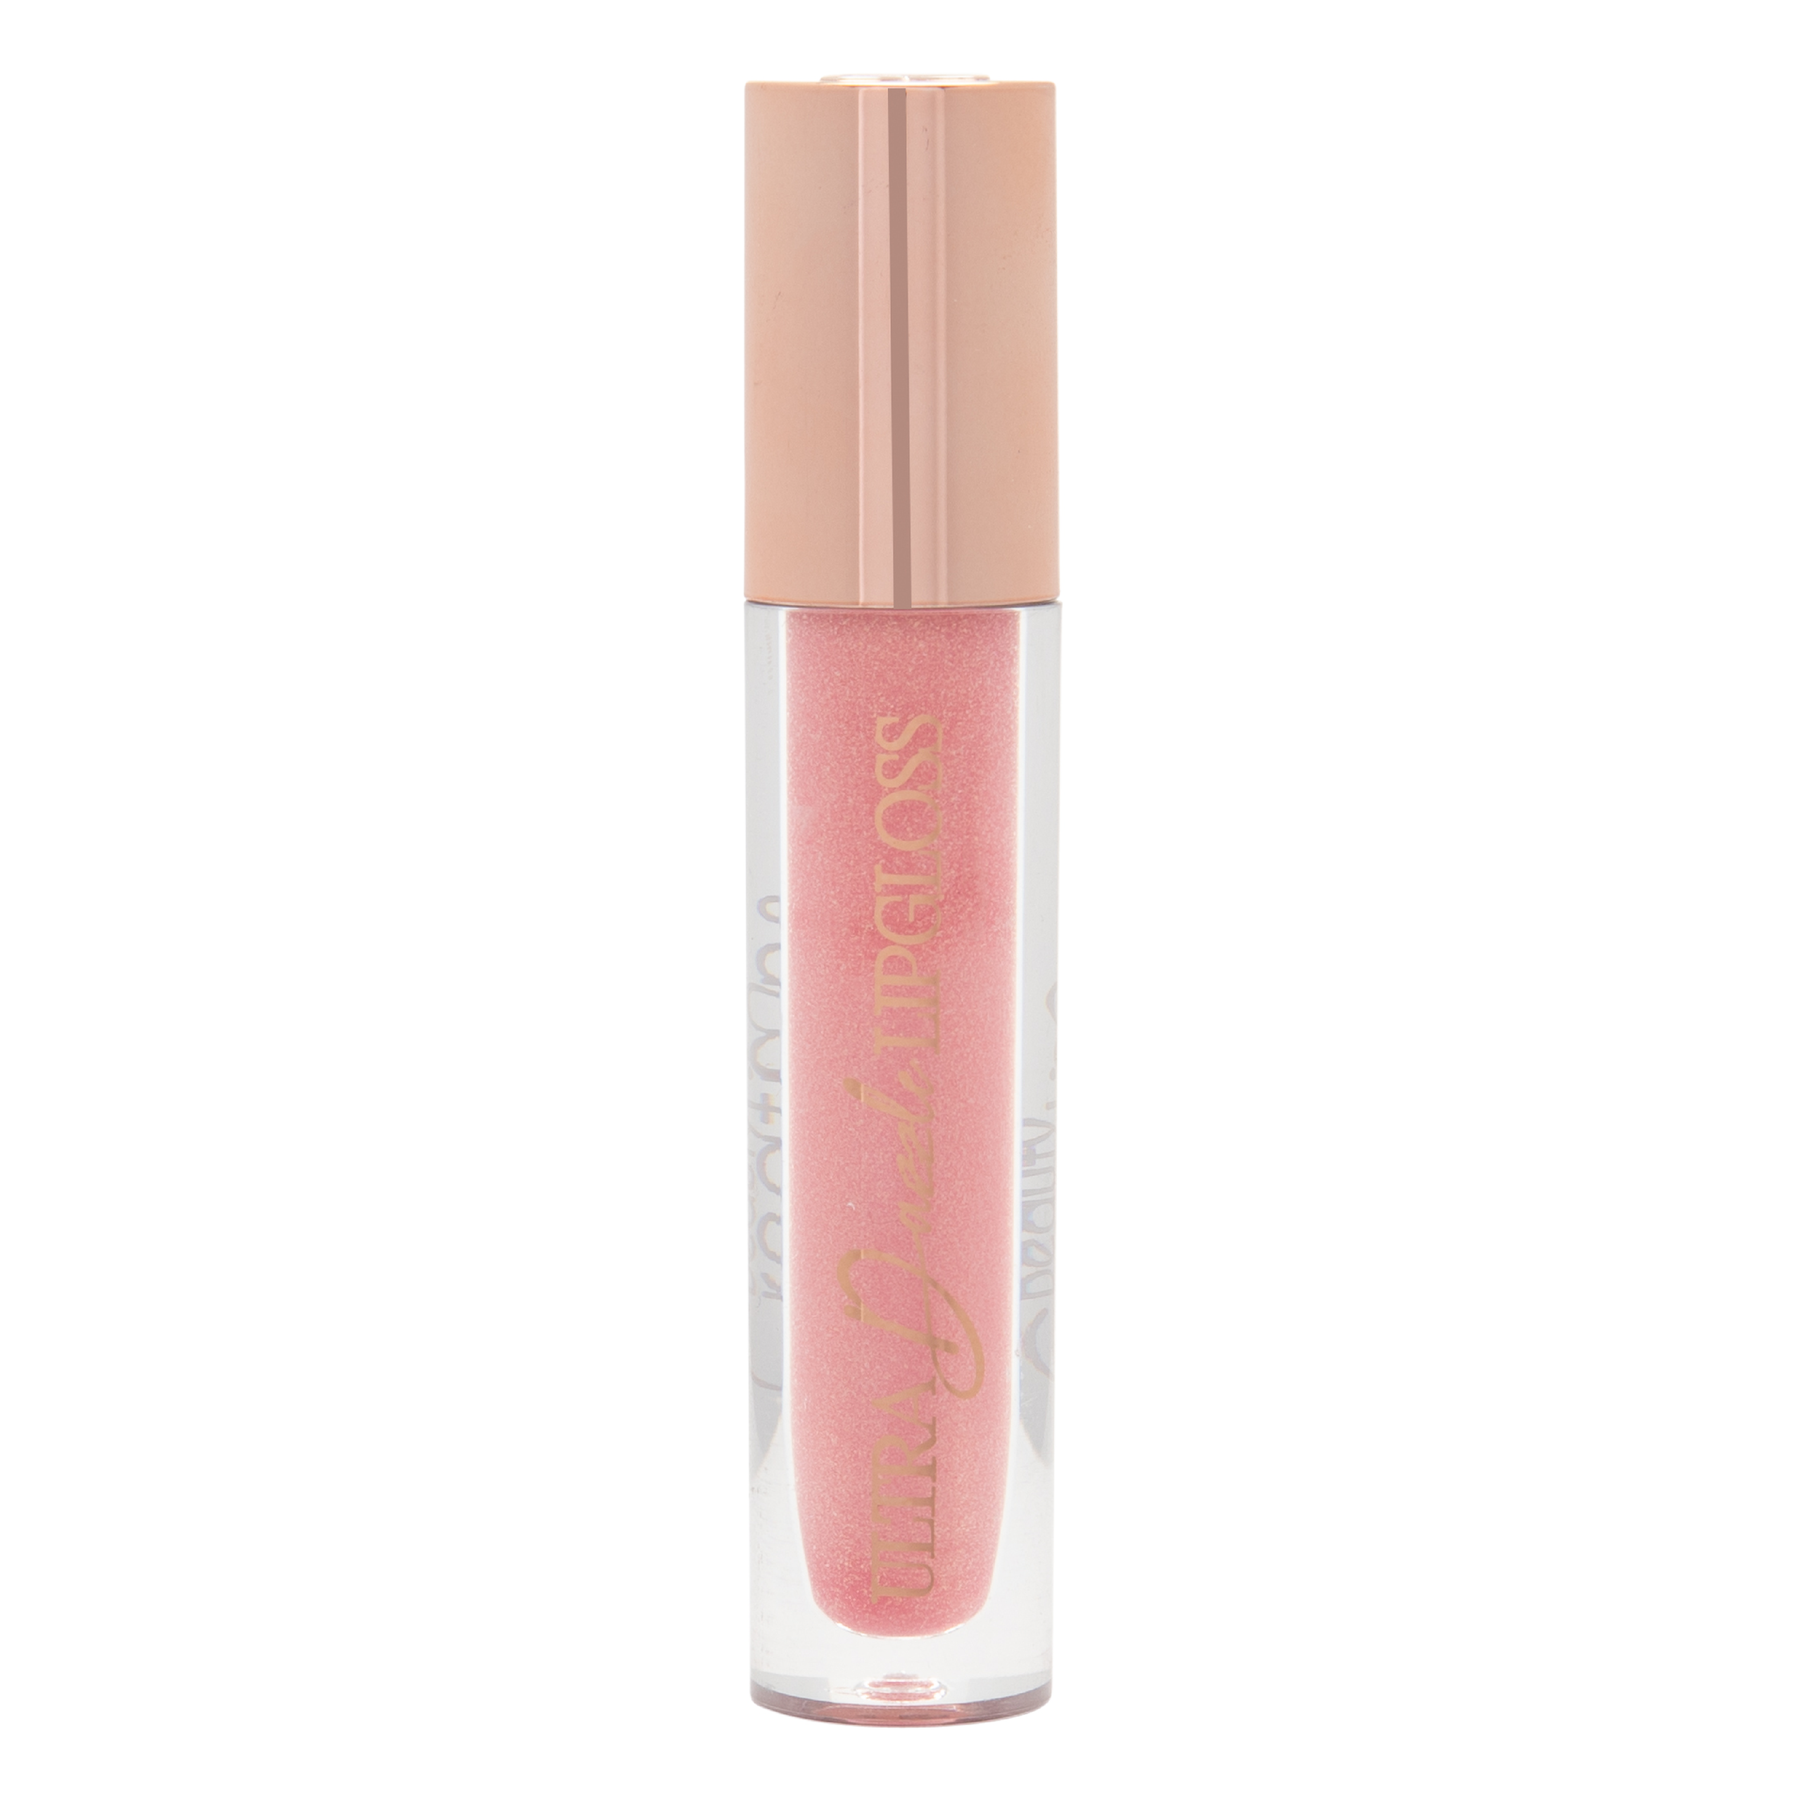 Beauty Creations - Ultra Dazzle Lipgloss Berry Dazzle